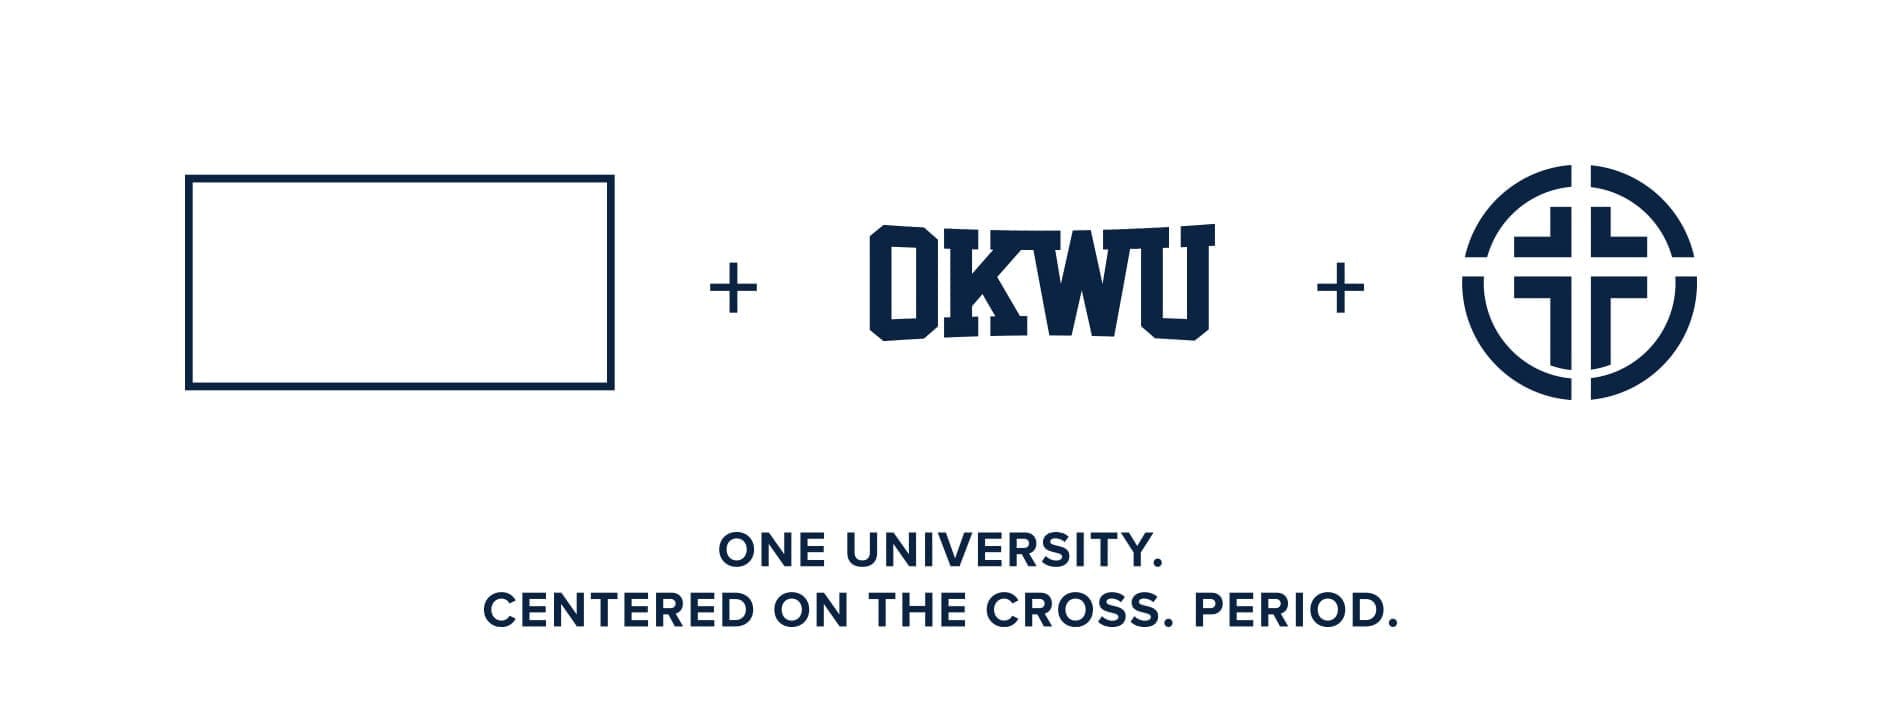 One University. Centered on the Cross. Period.